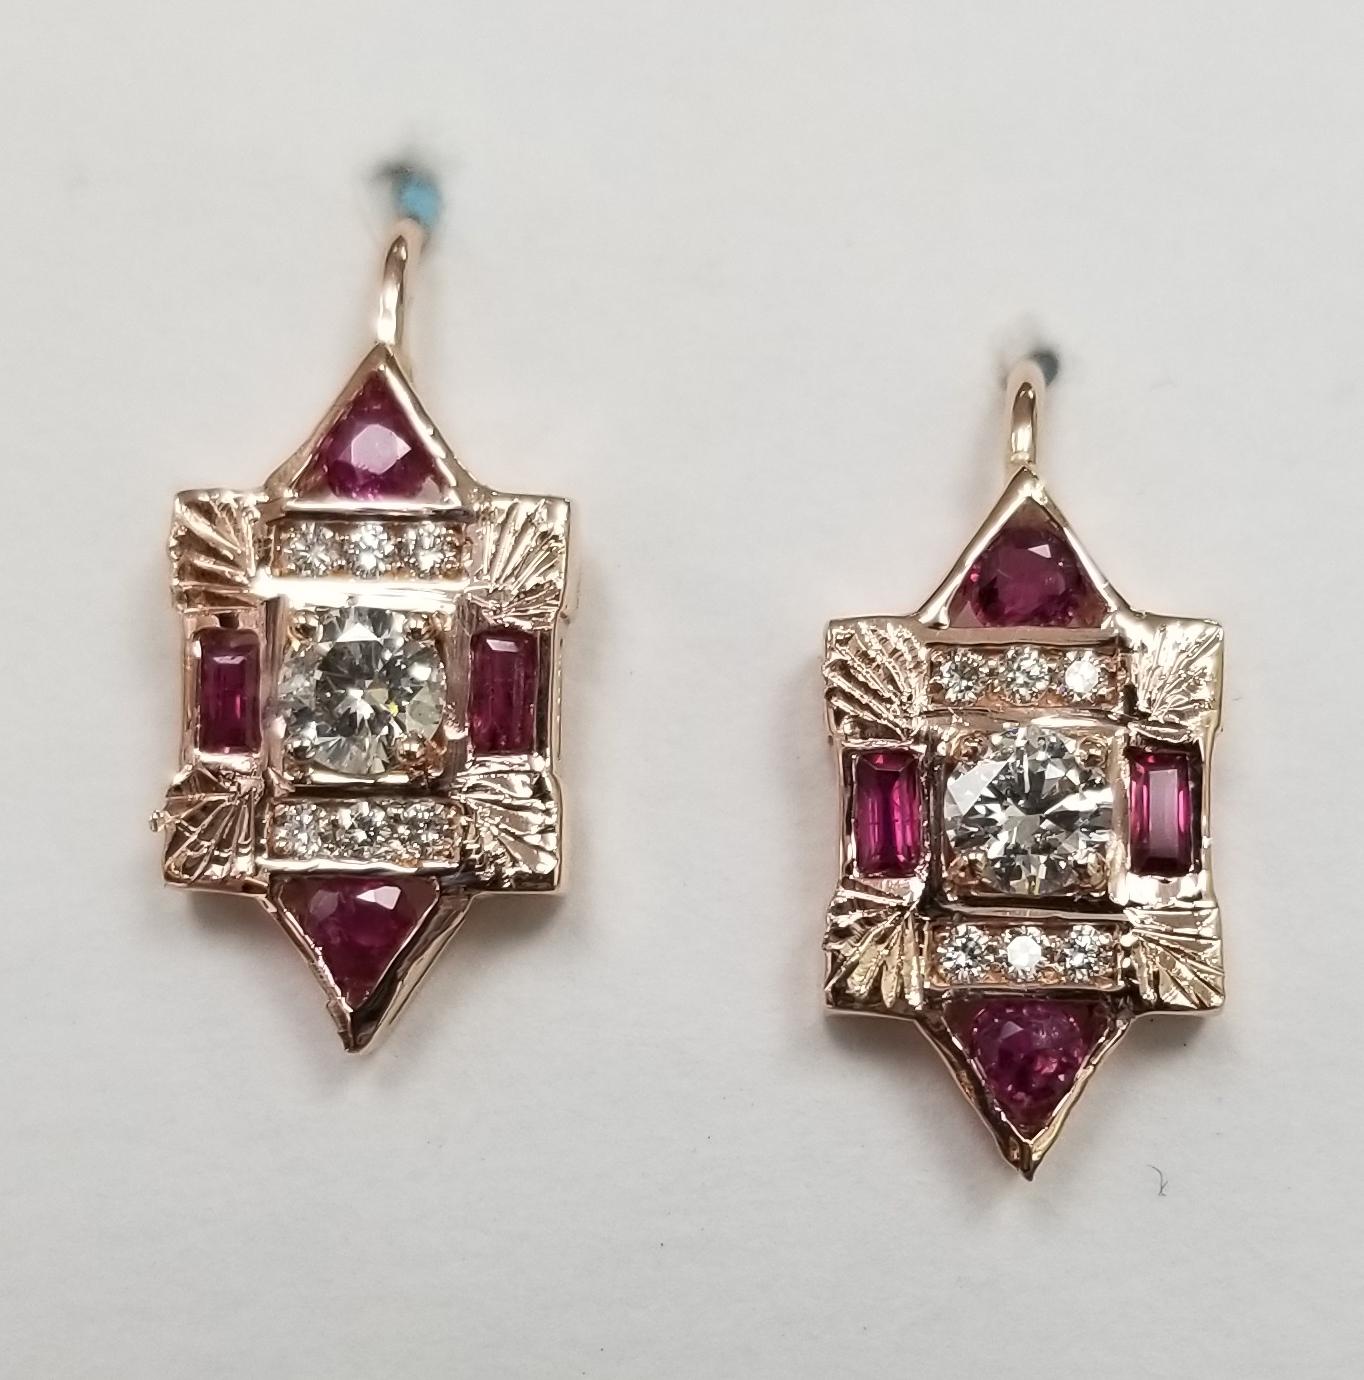  Classic art deco style inspired earrings with beautiful red rubies and round cut diamonds crafted in 14K rose gold.
Specifications:
    main stone: 2 round diamond .46pts.
    other diamonds: 12 round diamonds .15pts.
    additional: 4 ruby